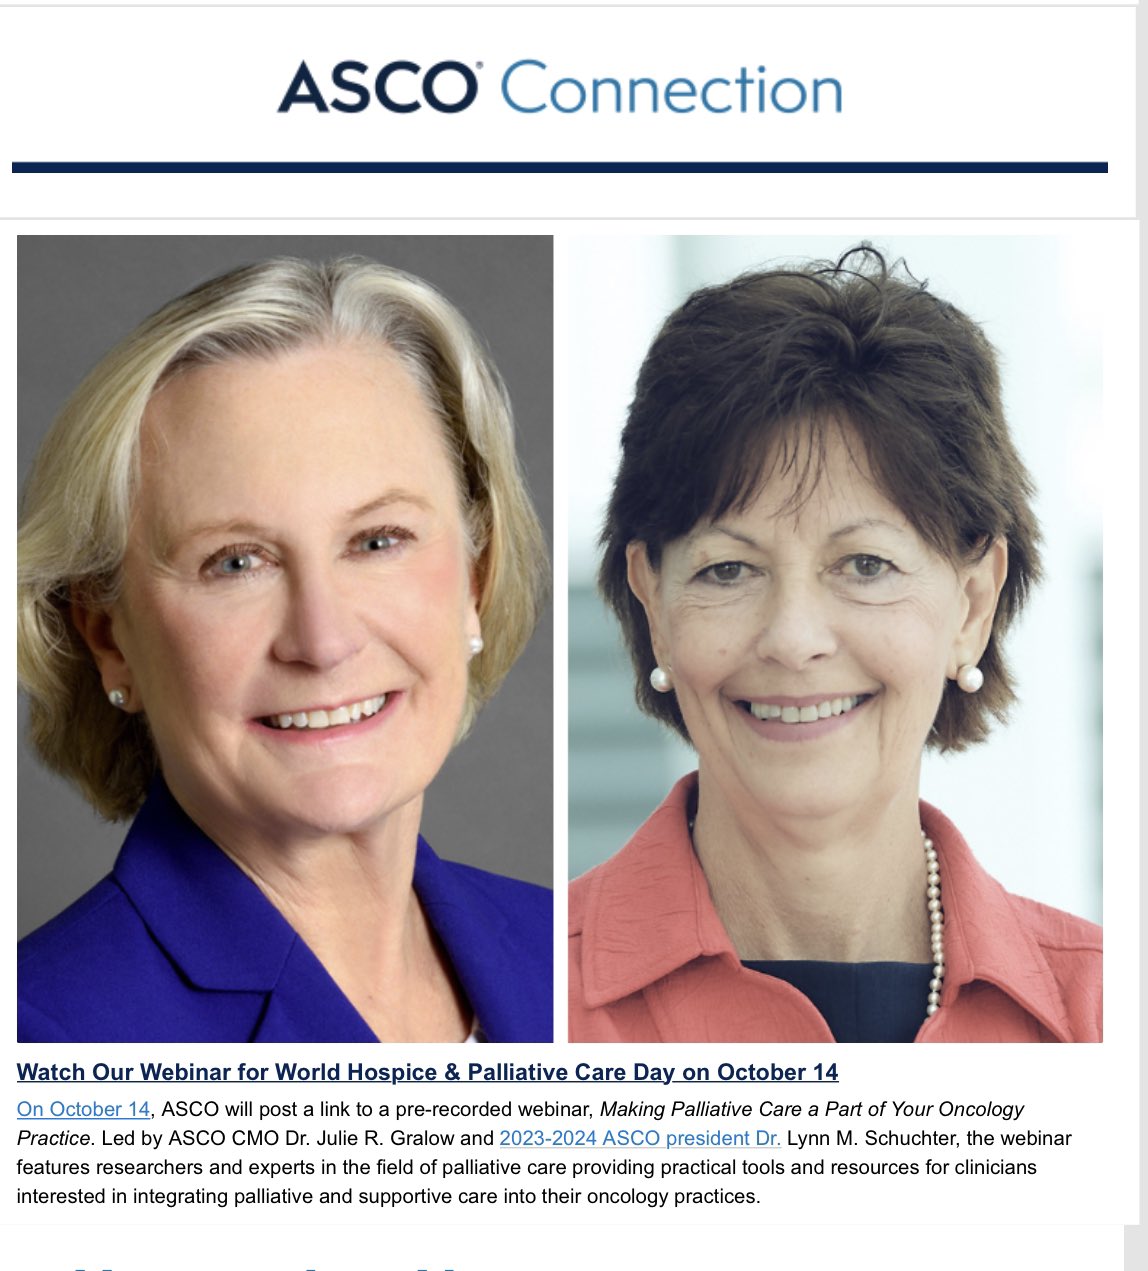 Julie Gralow: ASCO webinar in recognition of World Hospice and Palliative Care Day to be released October 14th.